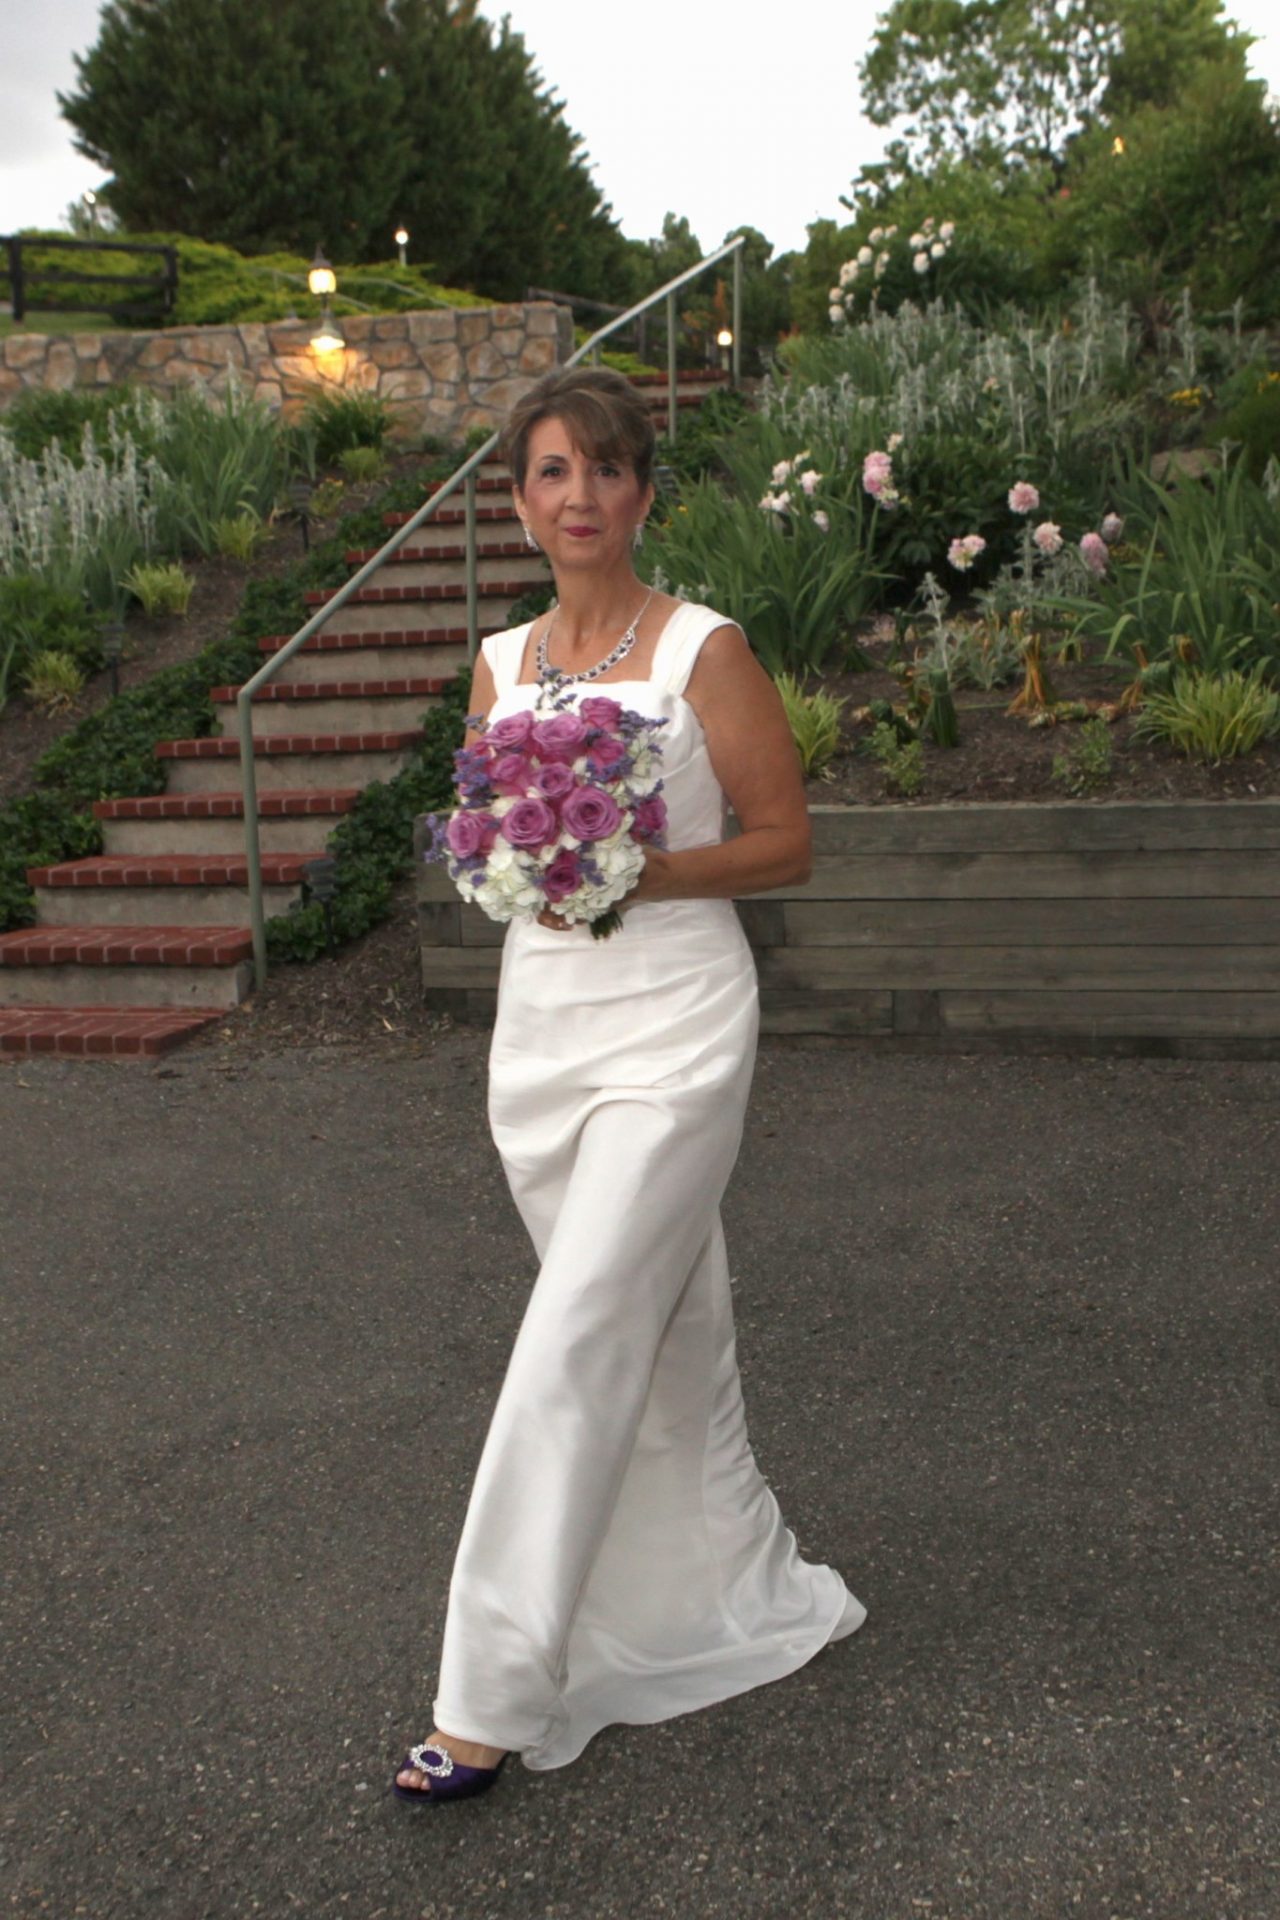 Bride walks from bride's room to the side deck before her wedding ceremony at Morningside Inn, in the background are the brick steps leading to the main entrance of the building.